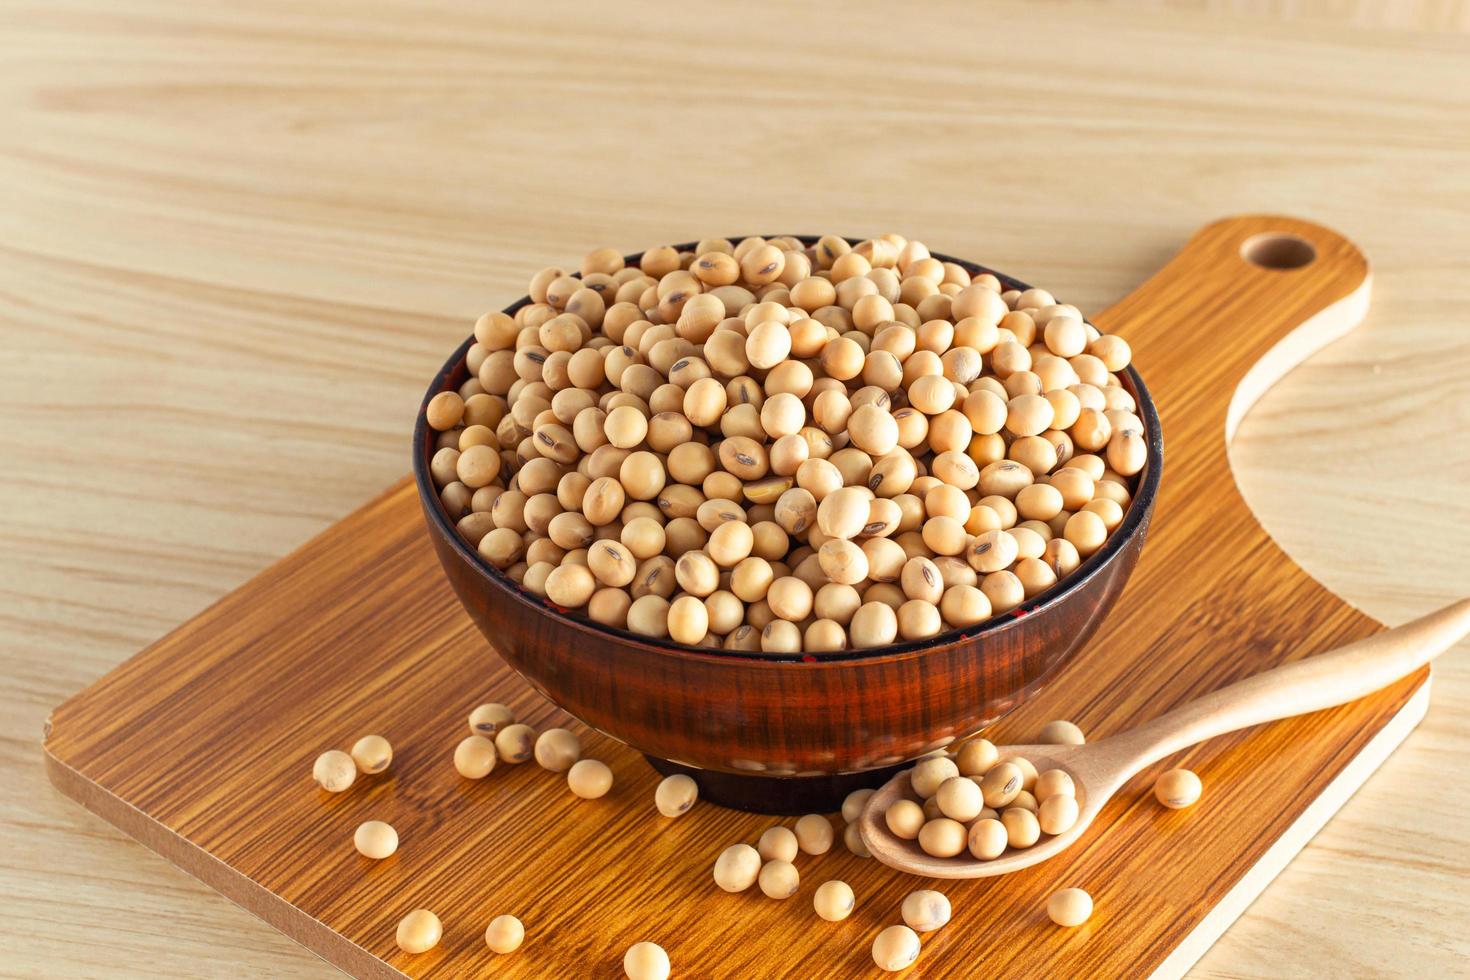 soybean in a bowl with wooden chopping board and spoon on wooden background, front view, selective focus. photo